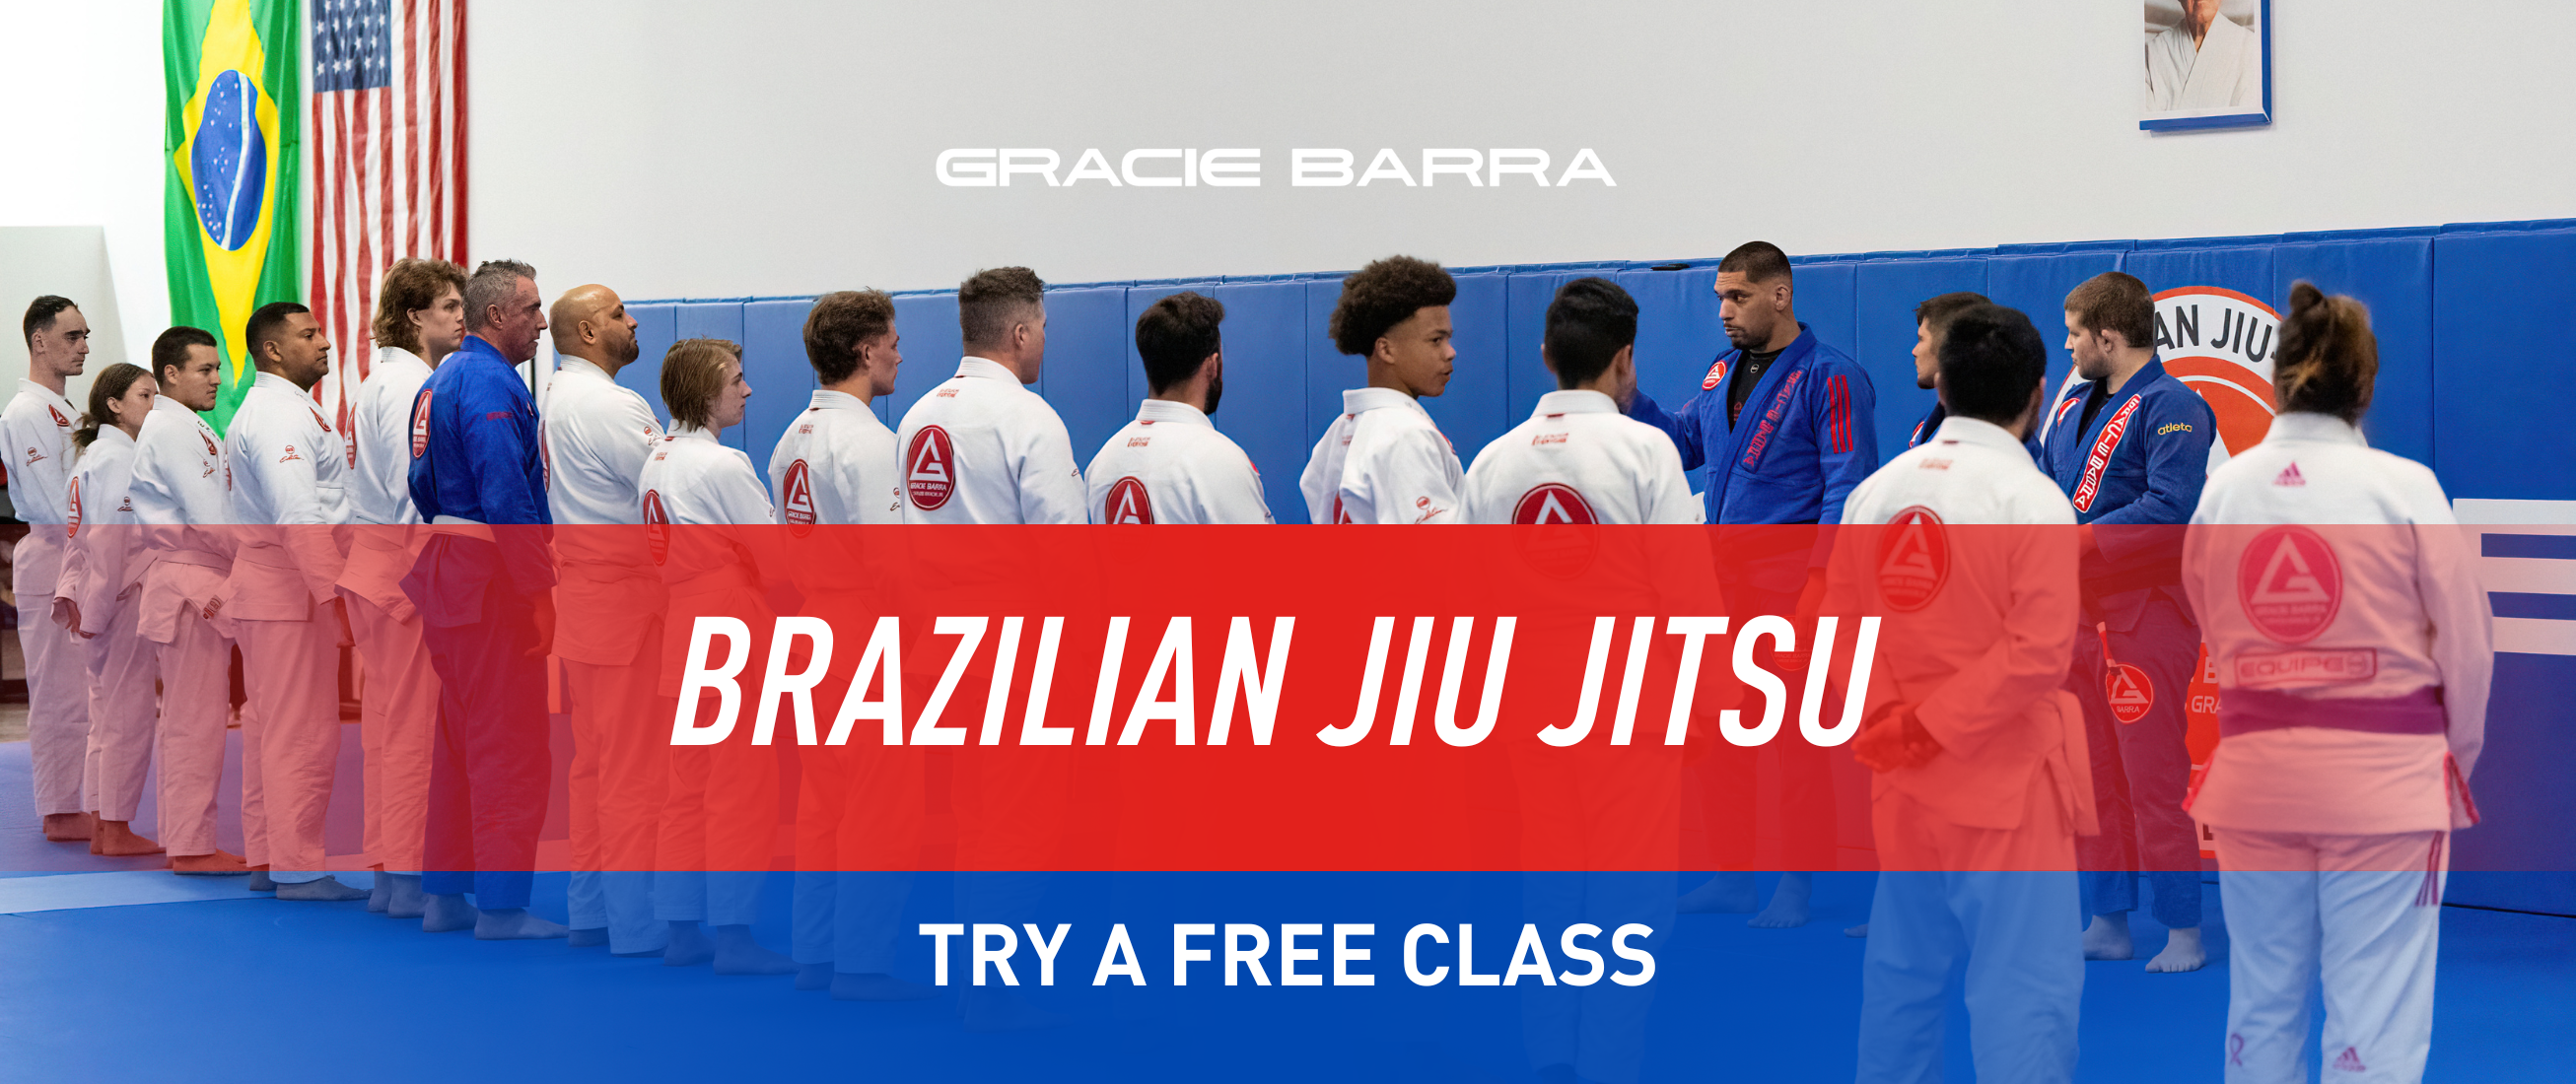 Try a Free Class